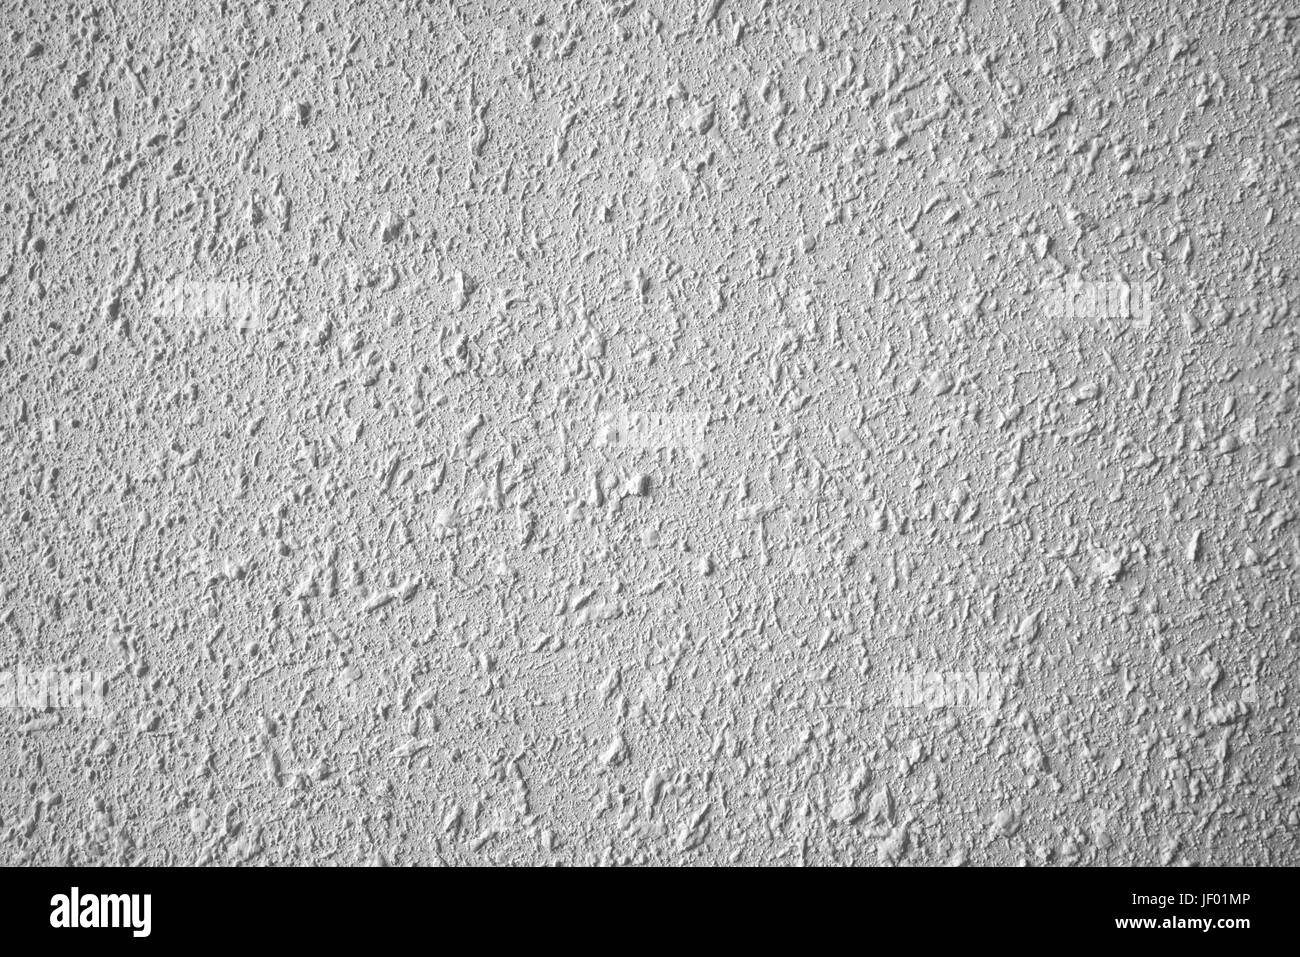 woodchip wallpaper on the wall Stock Photo